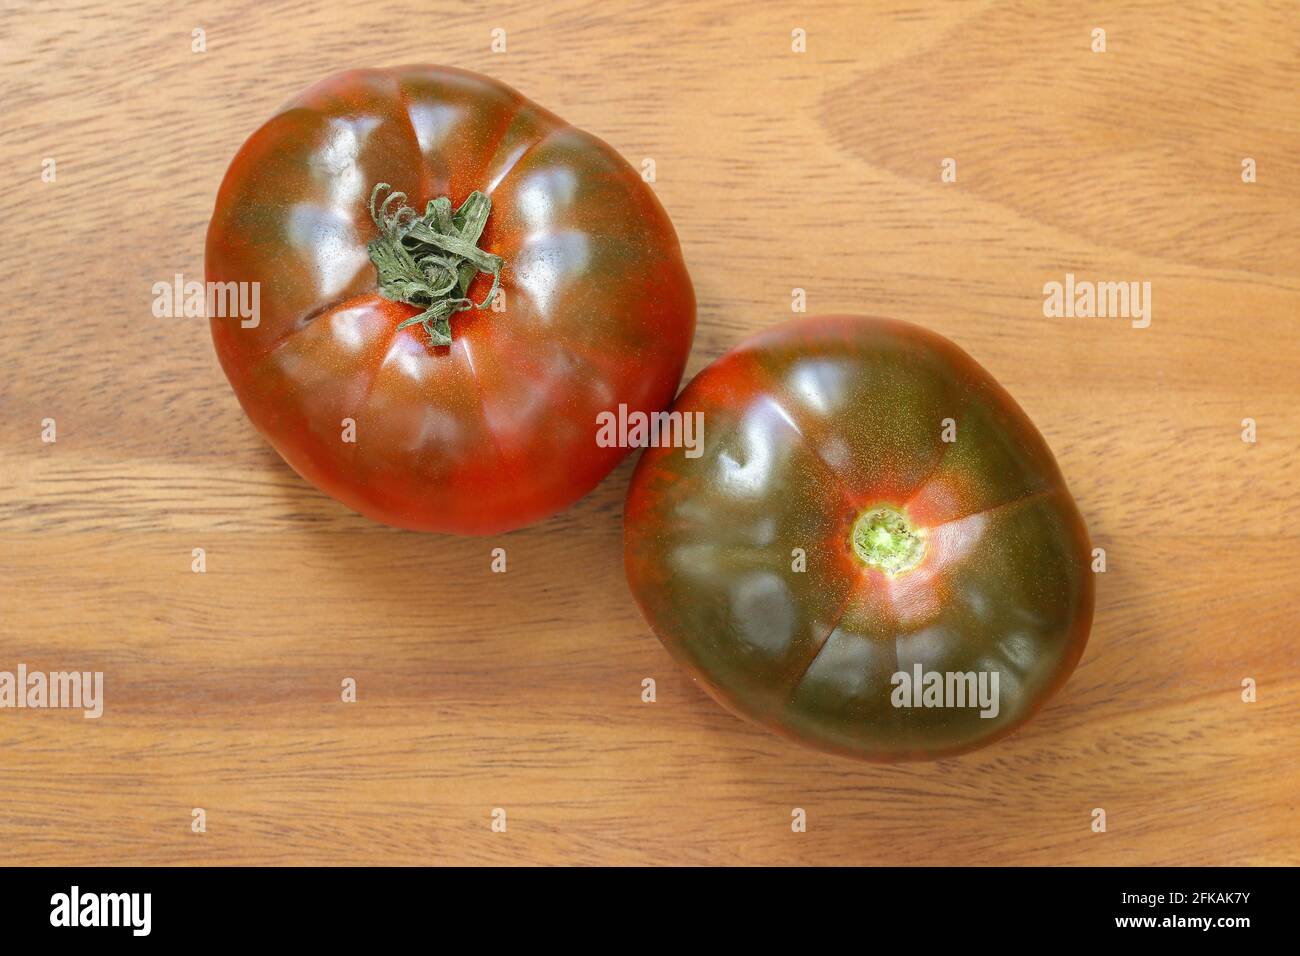 Top view of Pomodoro Marmande, Italian tomatoes on a wooden background Stock Photo